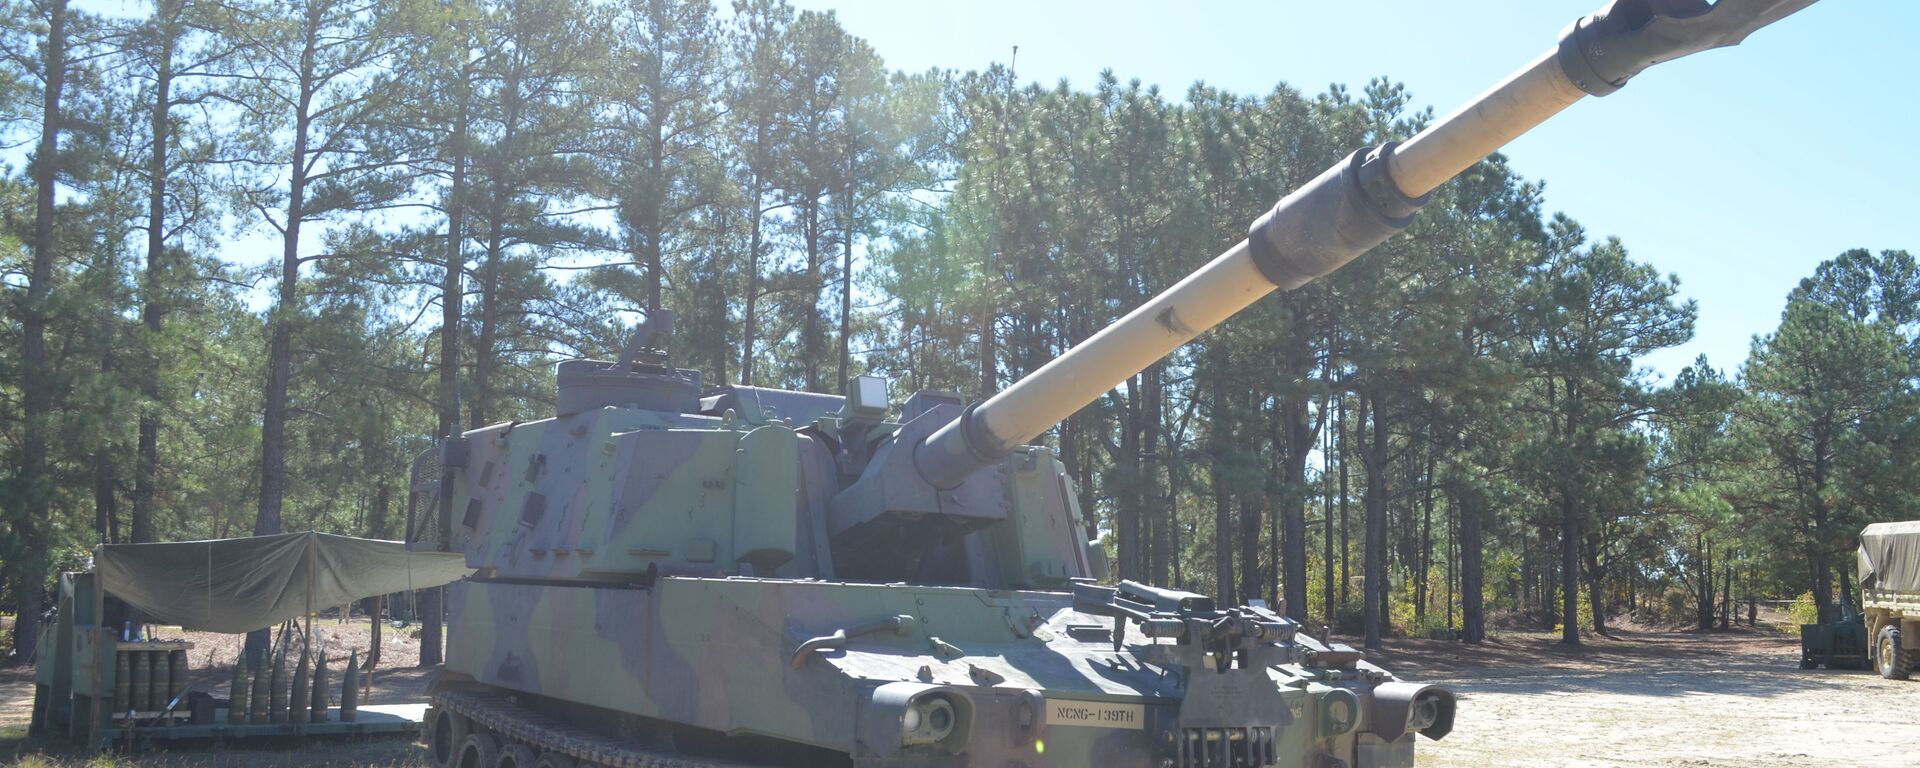 The M109 Paladin Self-Propelled Howitzer standing ready deep in the southern training areas at Fort Bragg. Nine National Guard troops from North and South Carolina, Florida, Georgia, Mississippi, Illinois and New Jersey are attending the 13 Bravo artillery military occupational specialty (MOS) reclassification course and will learn how to be a crew member on the three main “cannon” artillery weapons systems in the U.S. Army: The M119A3 105mm light towed howitzer, M777A2 155mm medium towed howitzer and the M109A6 Paladin 155mm self-propelled howitzer. Over the course of two days in the field, students will fire hundreds of rounds from all three weapons. - Sputnik International, 1920, 18.01.2023